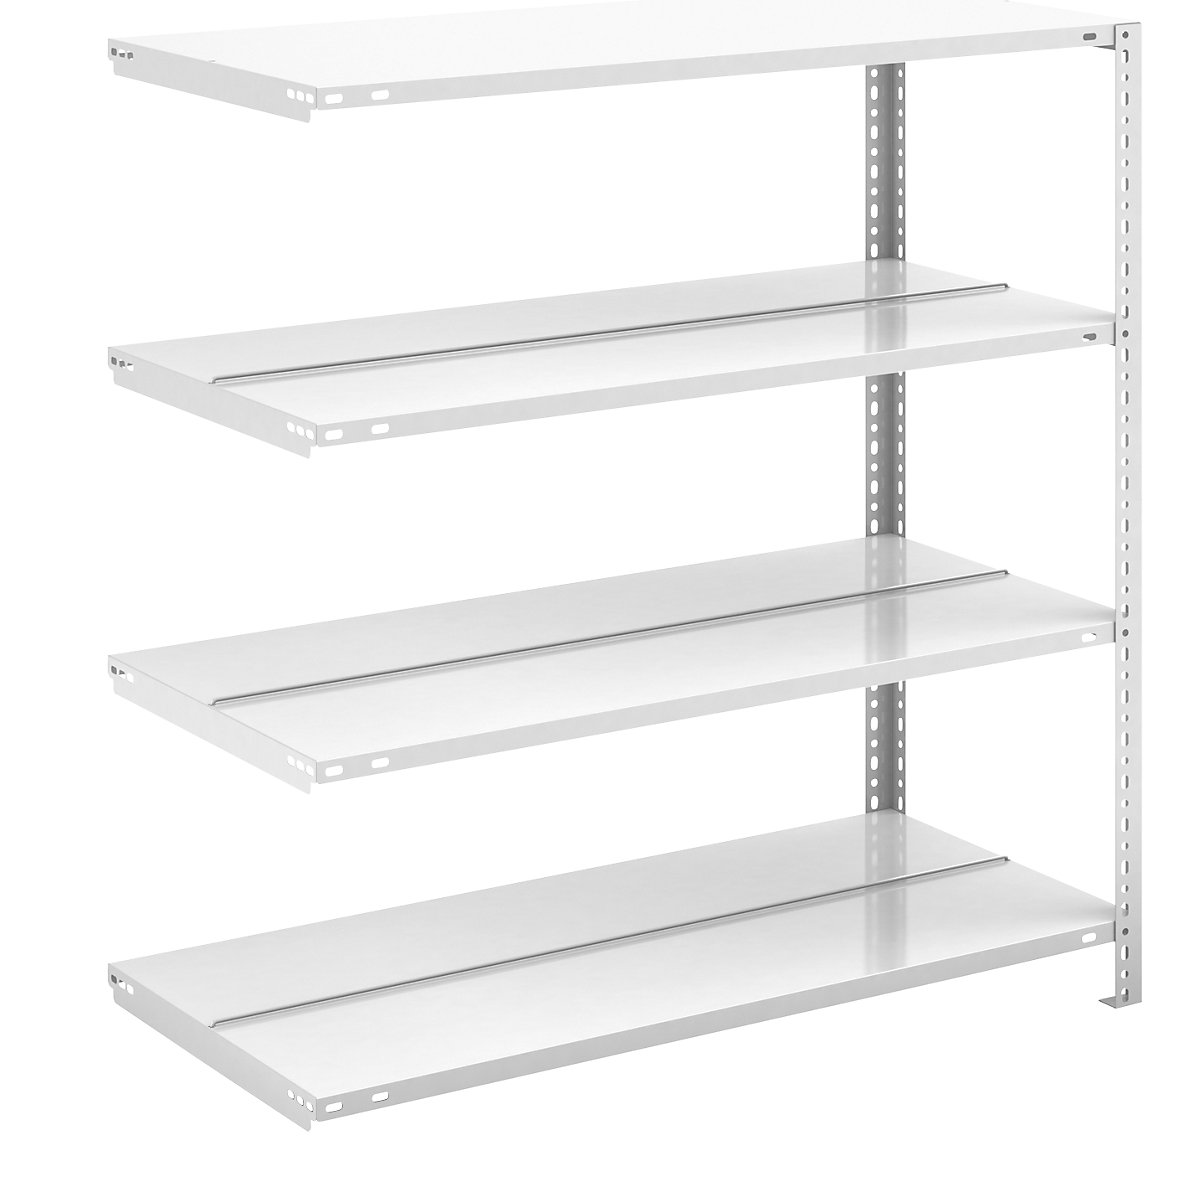 Bolt-together archive shelving, light grey RAL 7035 – hofe, shelf height 1150 mm, double sided, extension shelf, width x depth 1000 x 600 mm-6